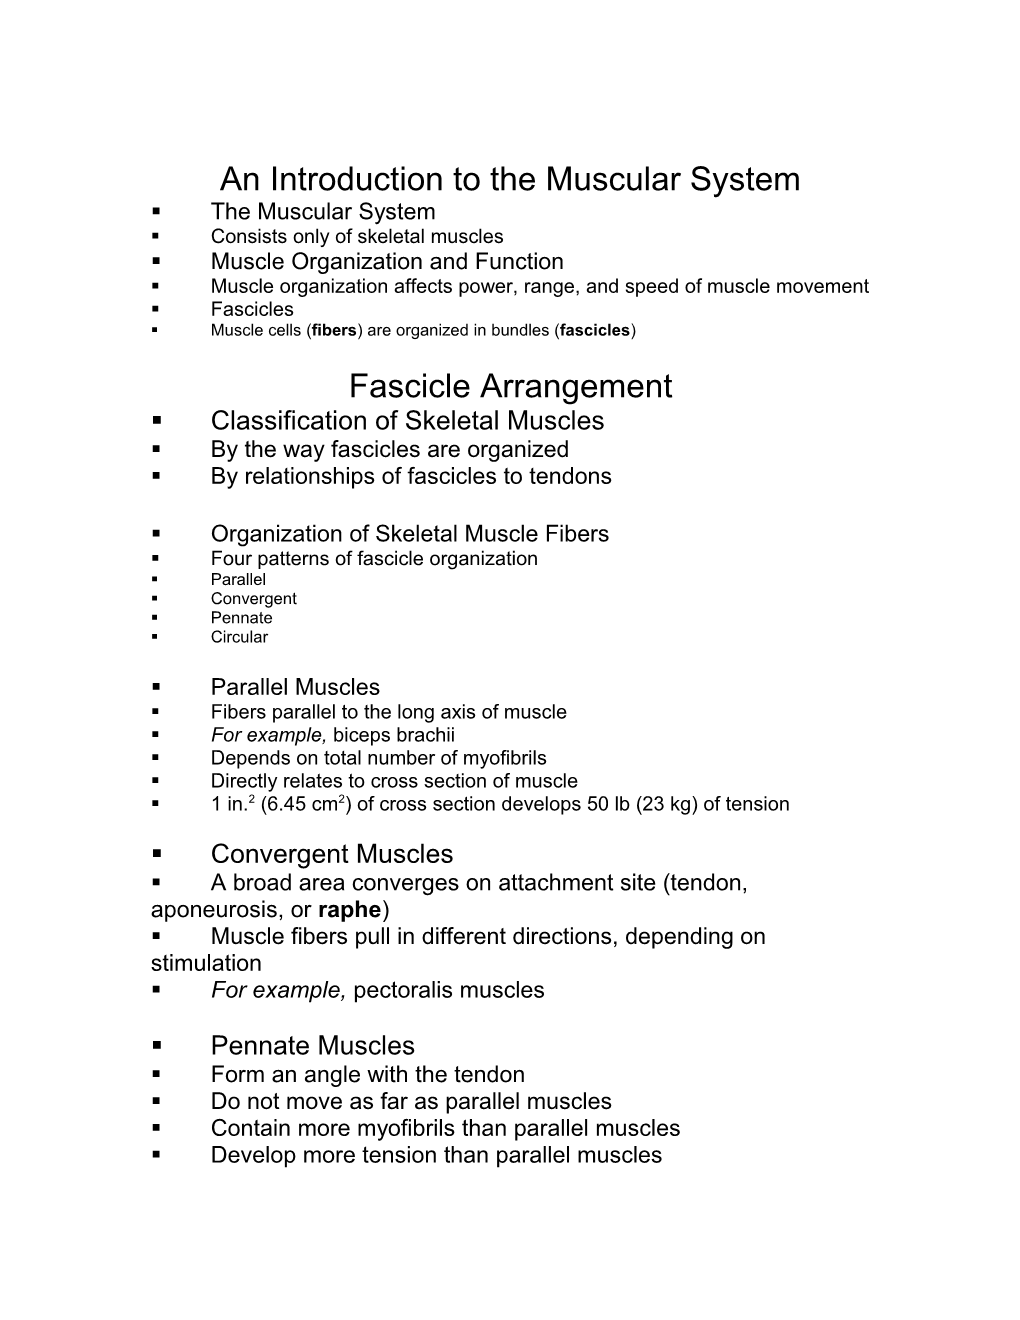 An Introduction to the Muscular System